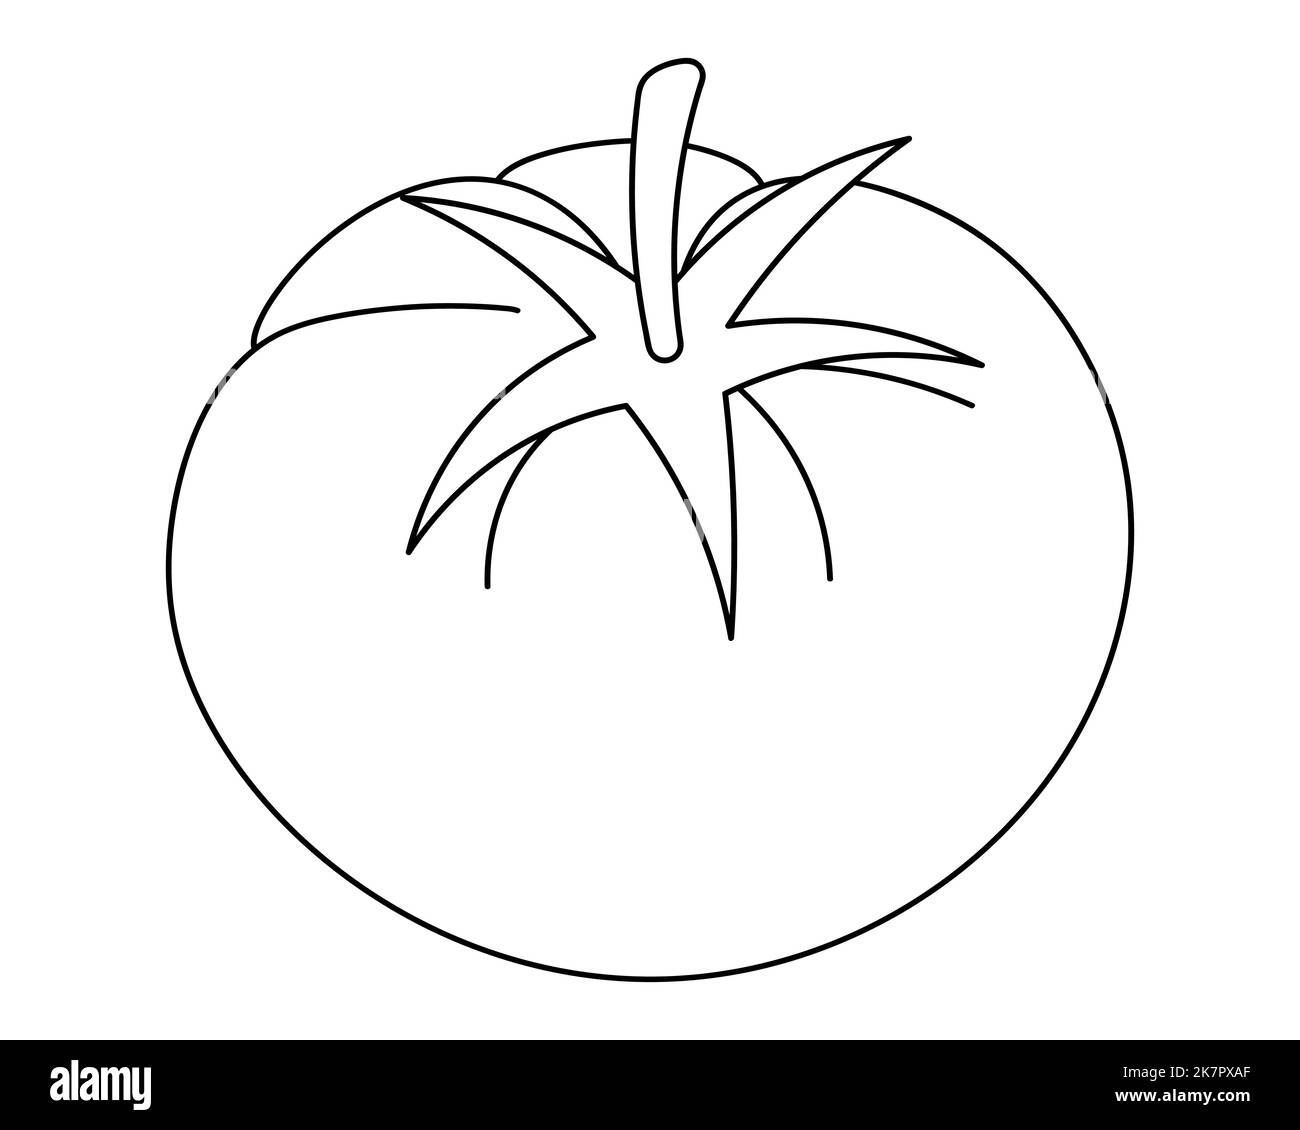 A tomato. Vector illustration. Outline on an isolated white background. Doodle style. Sketch. Vegetable culture of the genus Solanaceae. Vegan food. Stock Vector